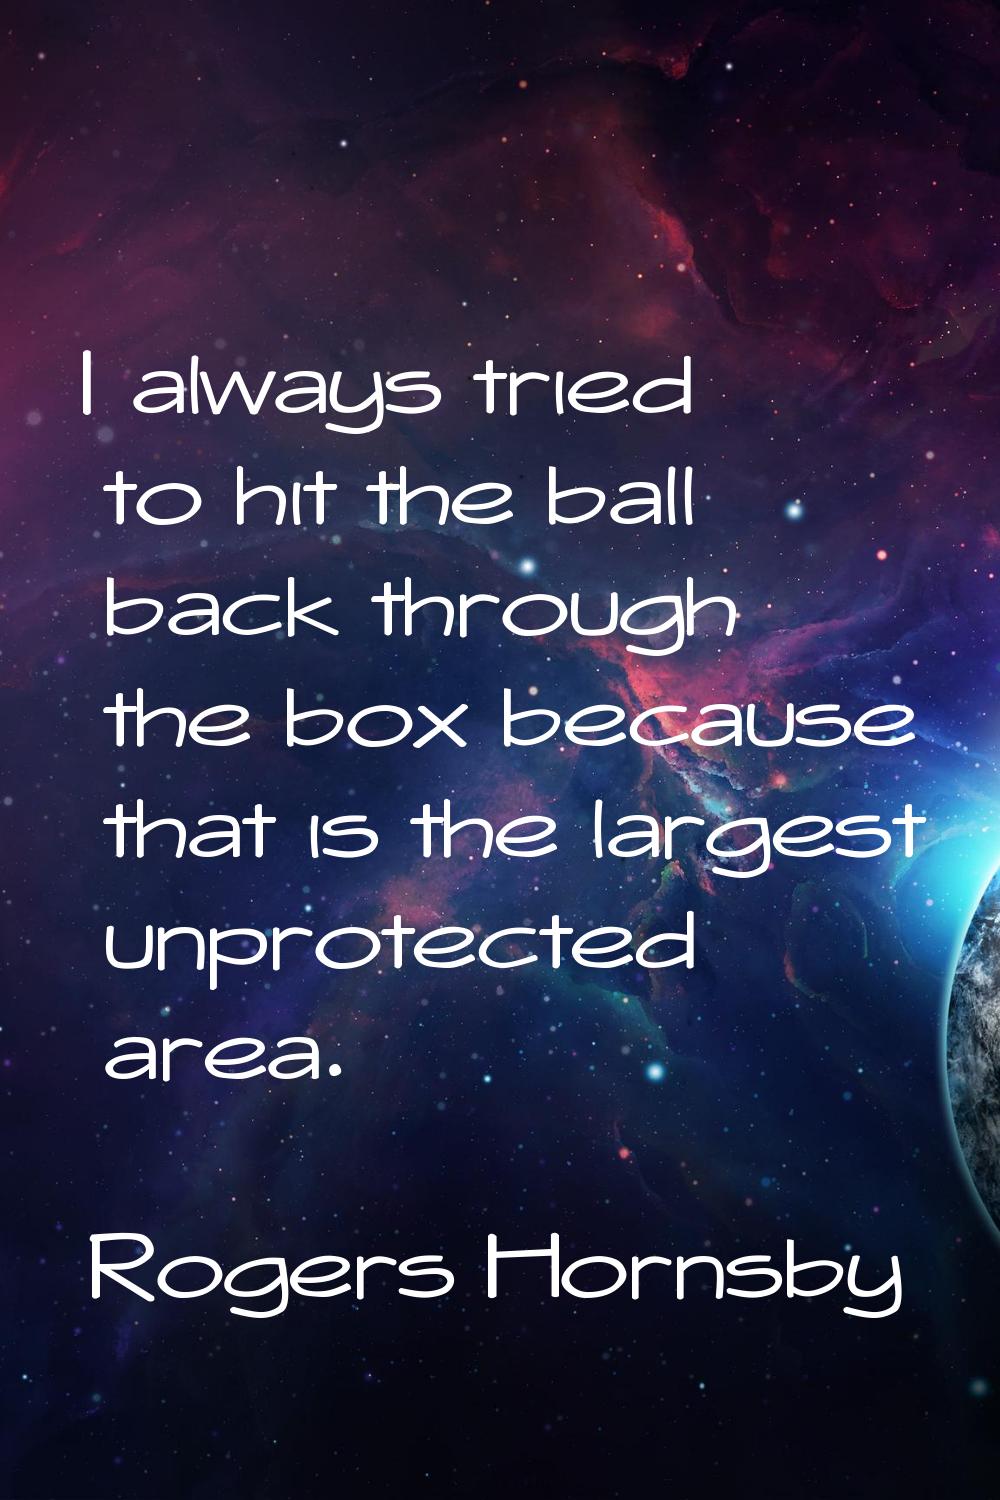 I always tried to hit the ball back through the box because that is the largest unprotected area.